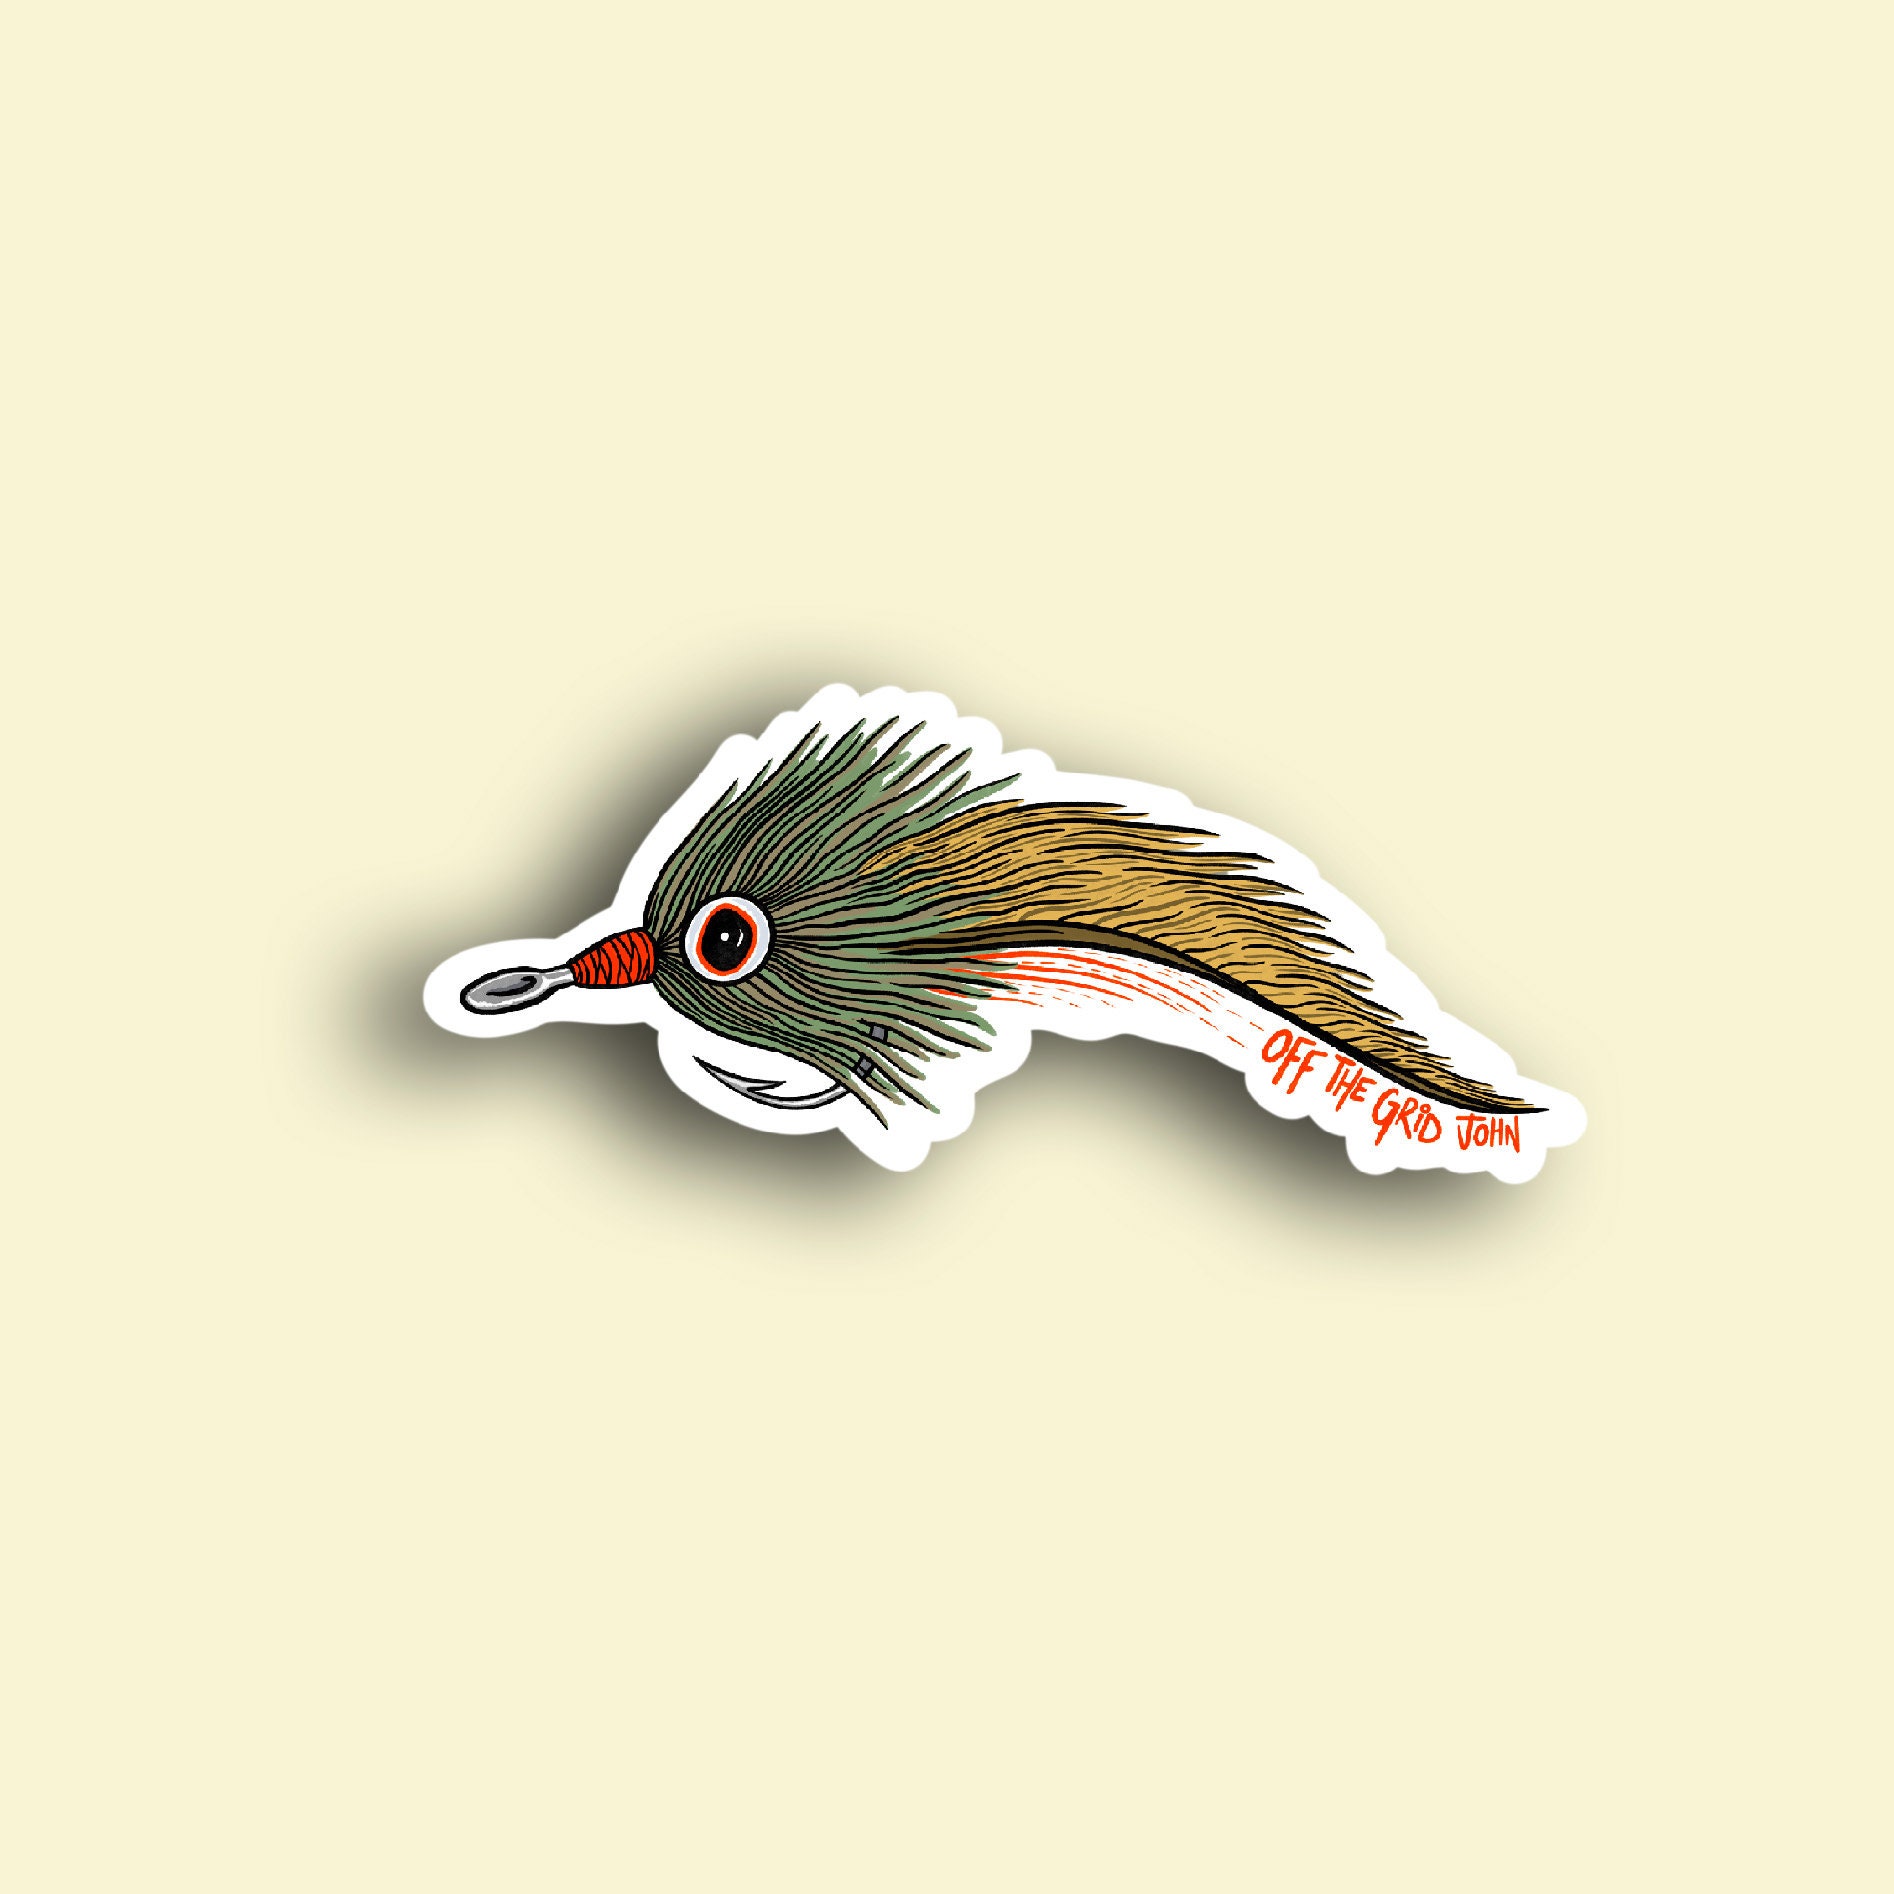 Fly Fishing Tarpon Fly Sticker Outdoors Nature Decals off the Grid